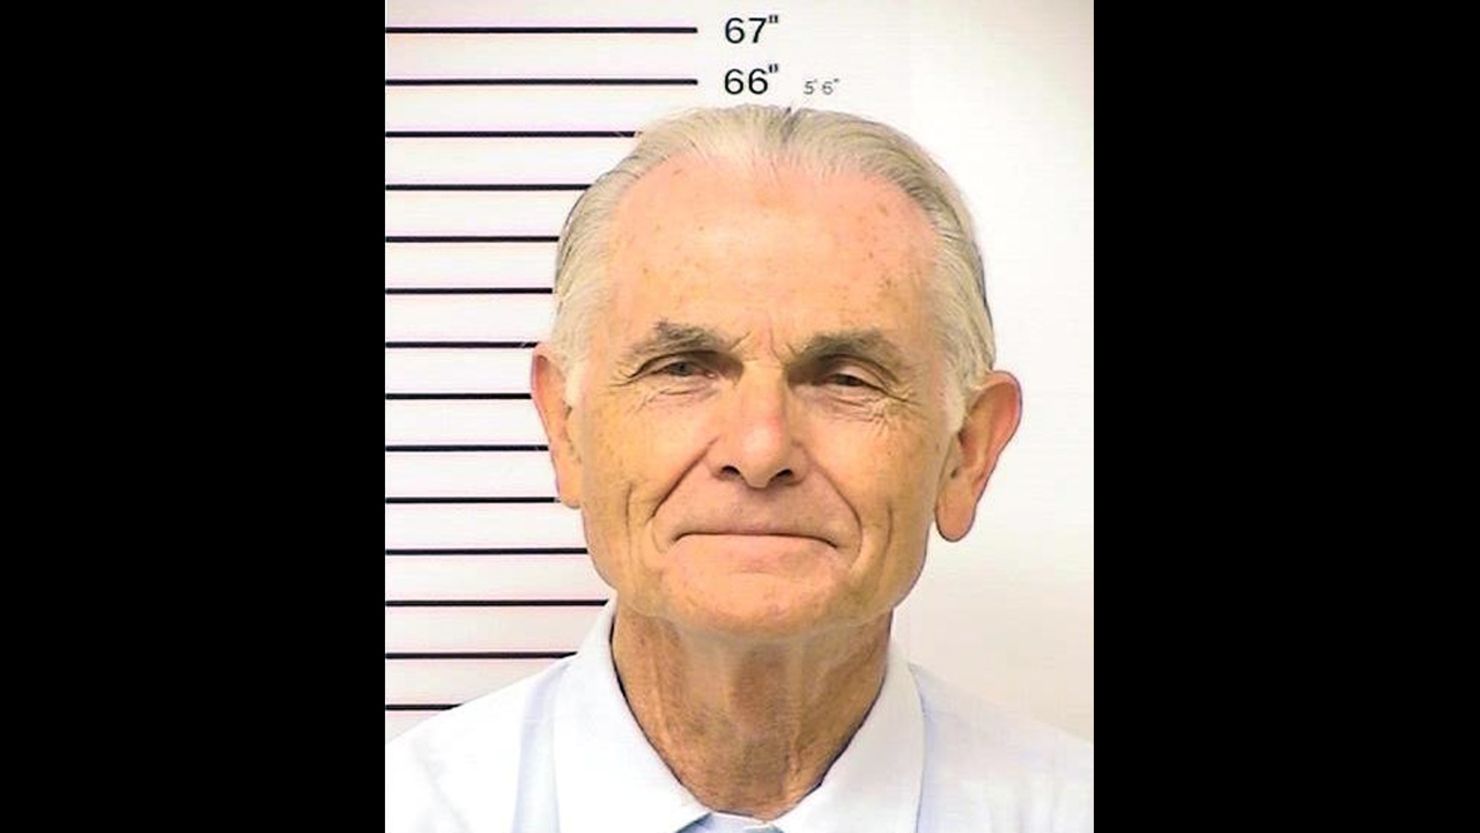 Bruce Davis "currently poses a danger to society," Gov. Jerry Brown wrote in reversing the parole decision.